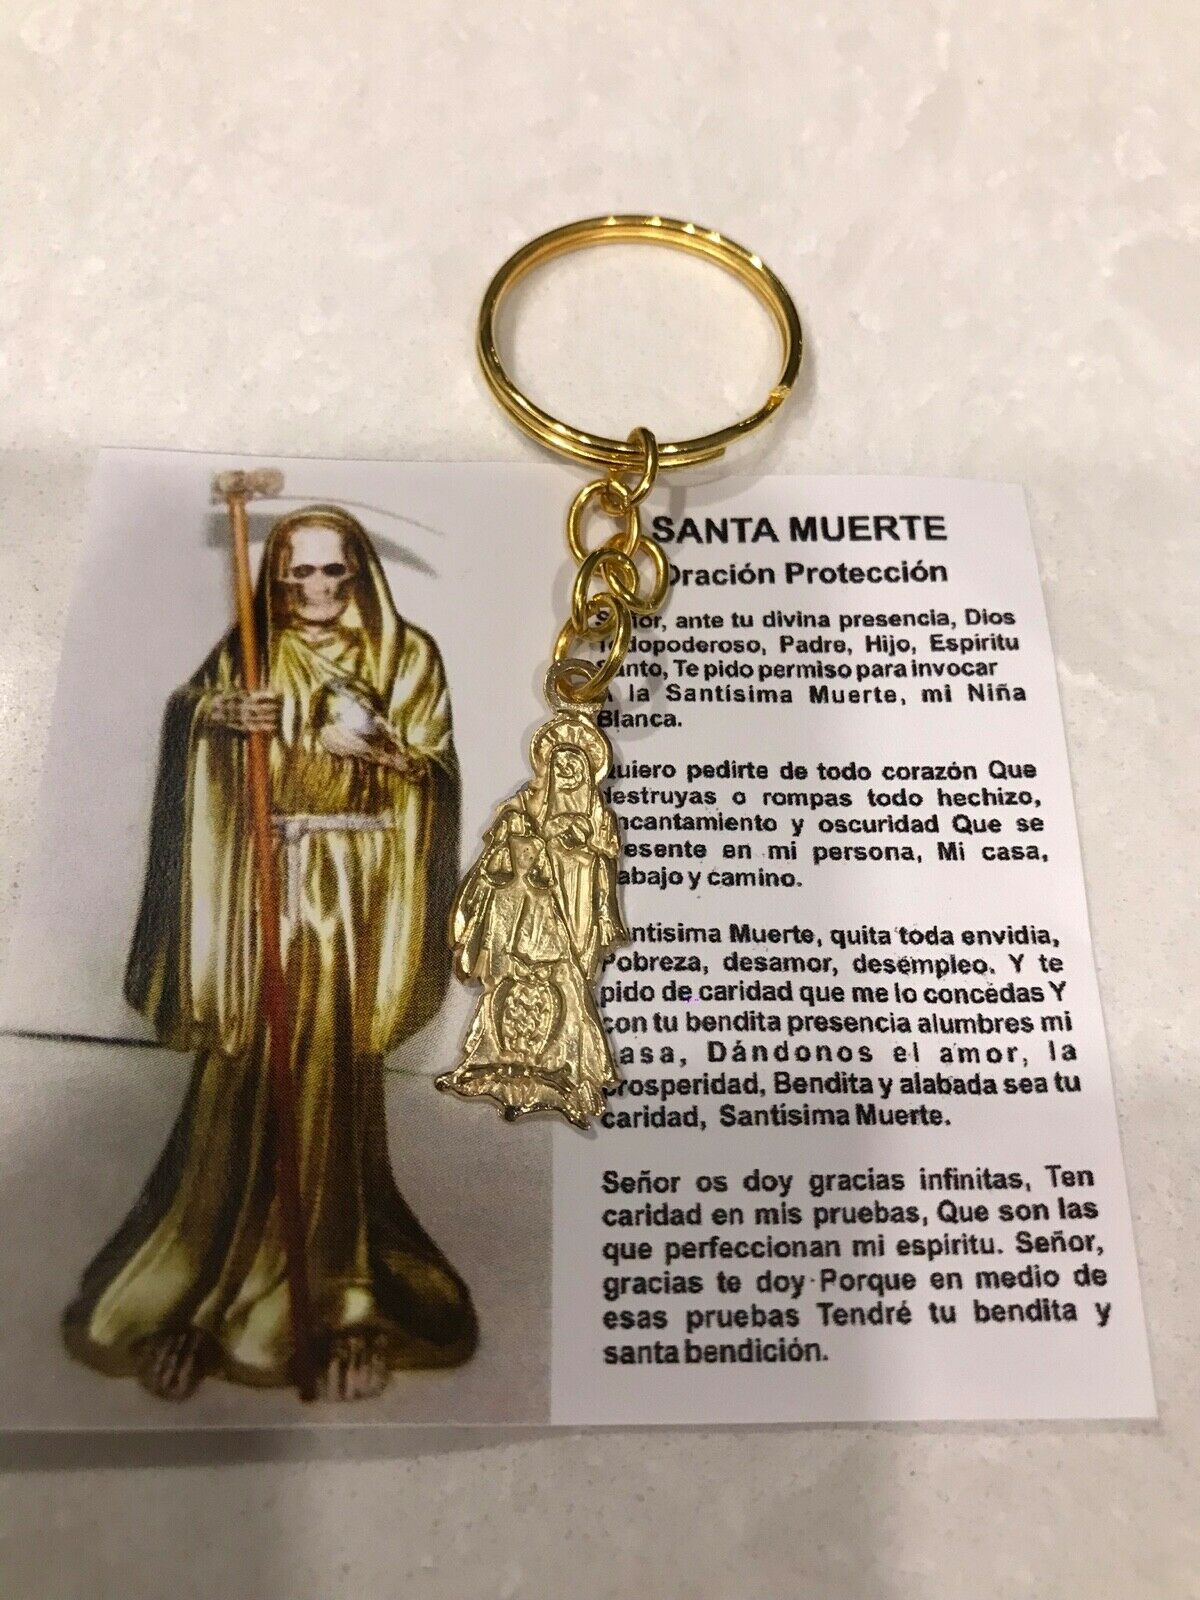 Santa Muerte Llavero - Holy Death Keychain Gold Color With Protection Prayer